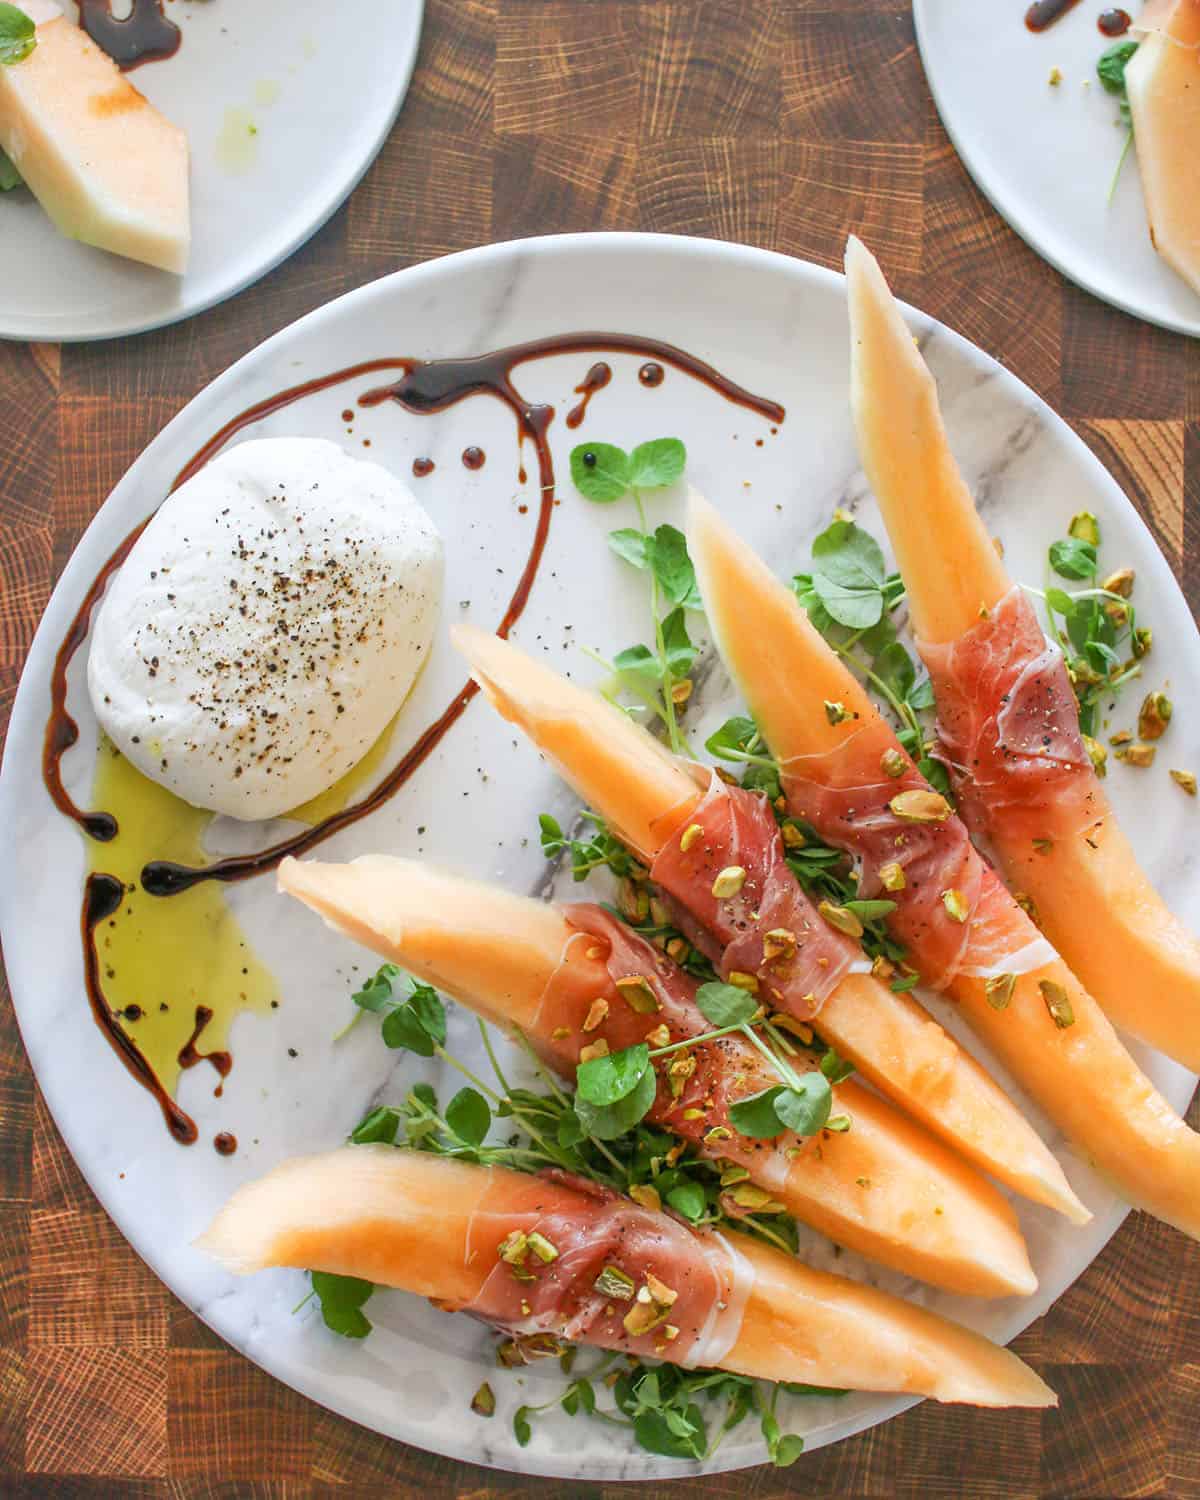 Crenshaw Melon, Burrata and prosciutto on a marble platter with wood cutting brown in the background, two plates off to the side